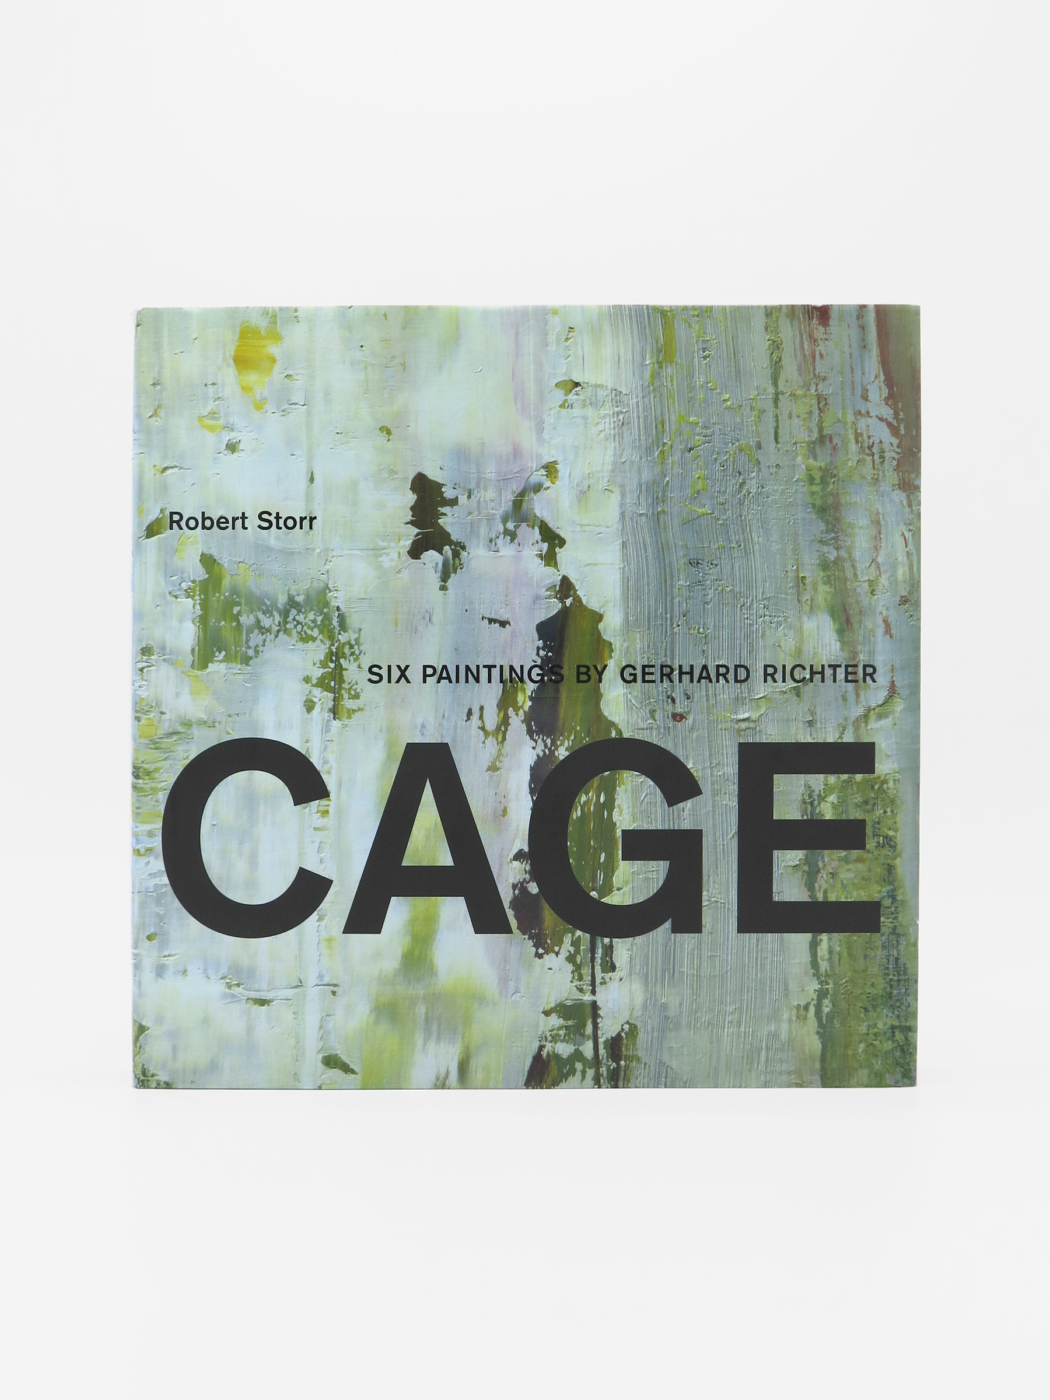 Robert Storr, Cage: Six Paintings by Gerhard Richter